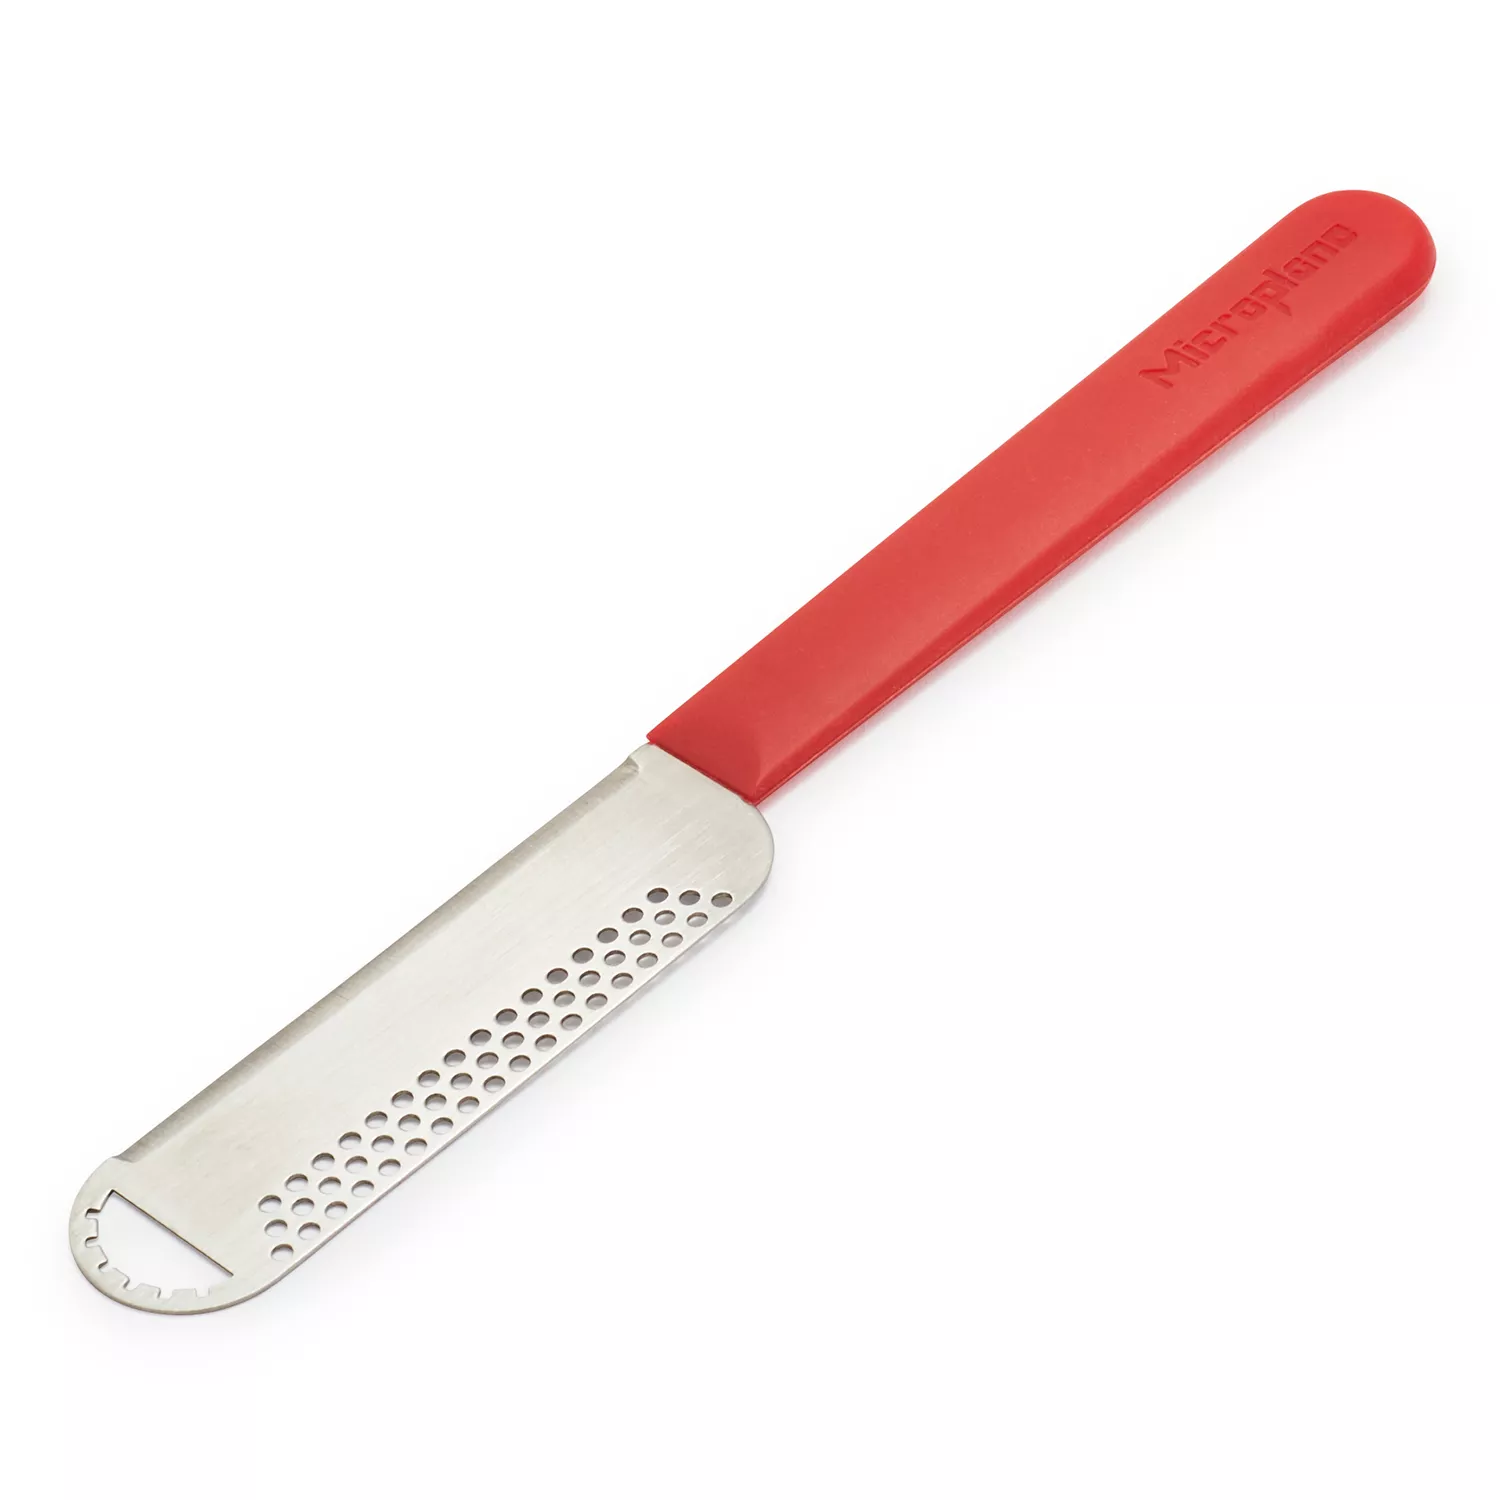 Grace Mfg. Microplane Butter Blade, Red